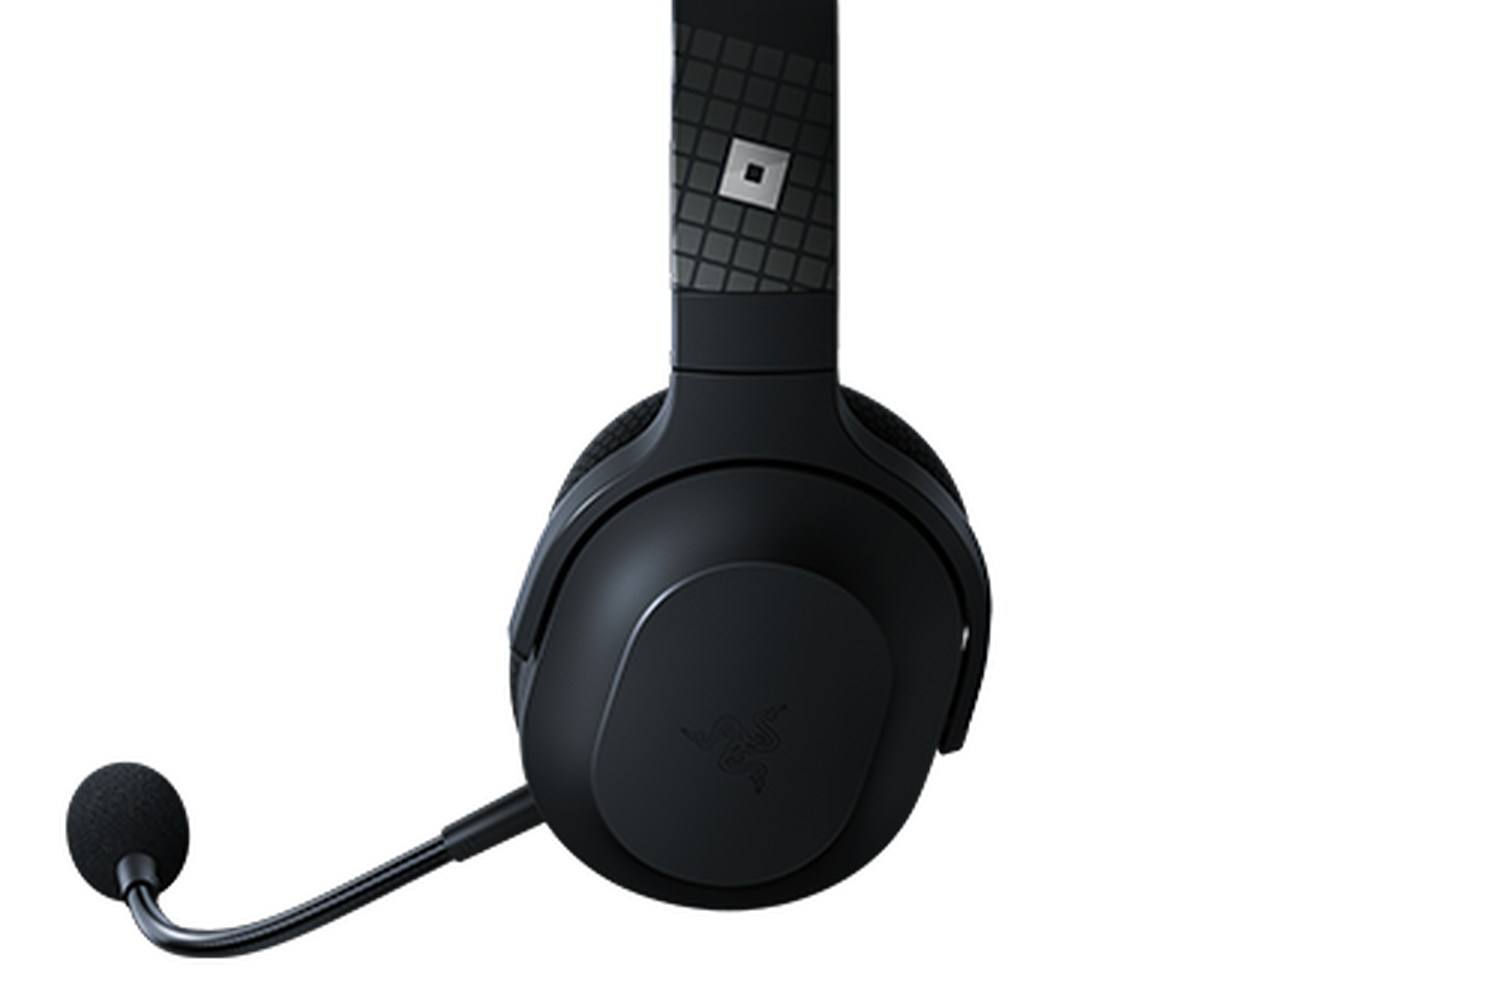 Razer Barracuda X (2022)-Wireless Multi-Platform Gaming and Mobile  Headset-Roblox Edition-FRML Packaging – Plus Gaming